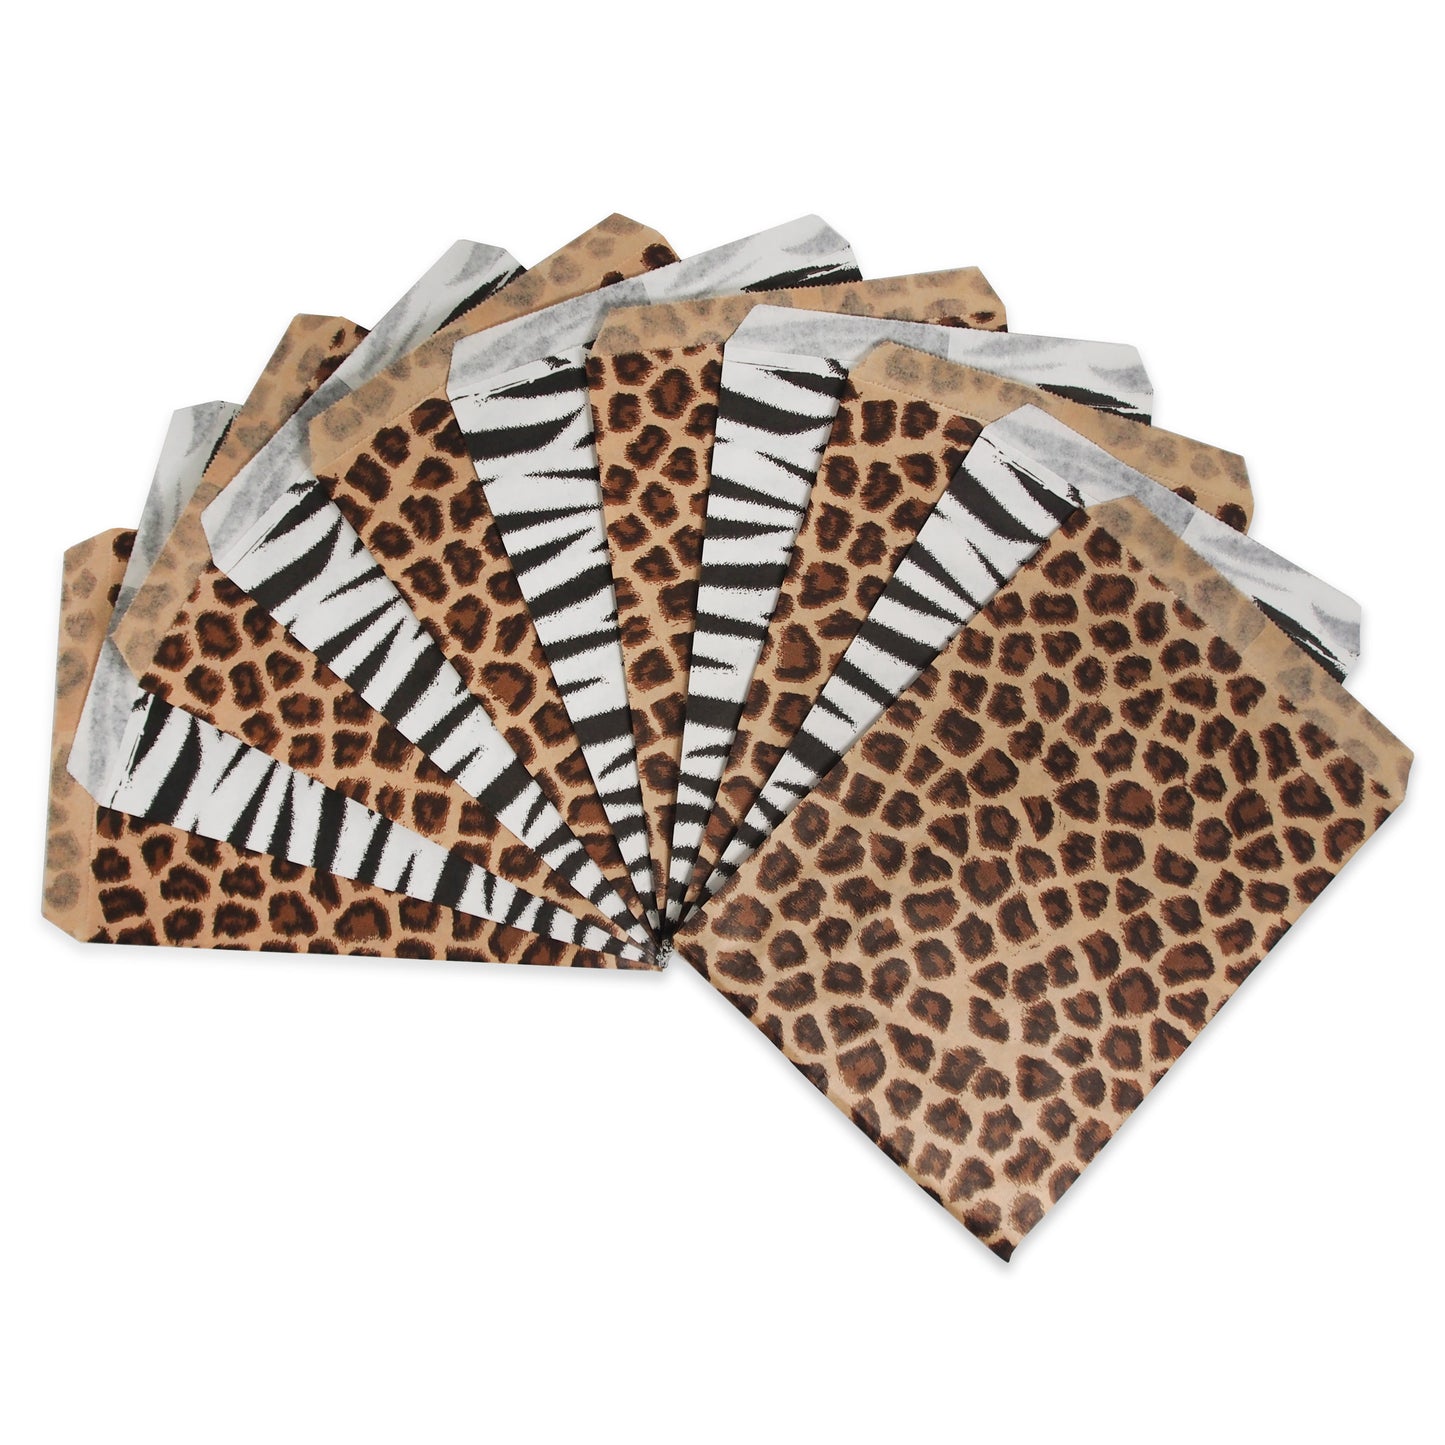 Animal Pattern Flat Paper Bags -100Bags/Pack - multiple colors & sizes available